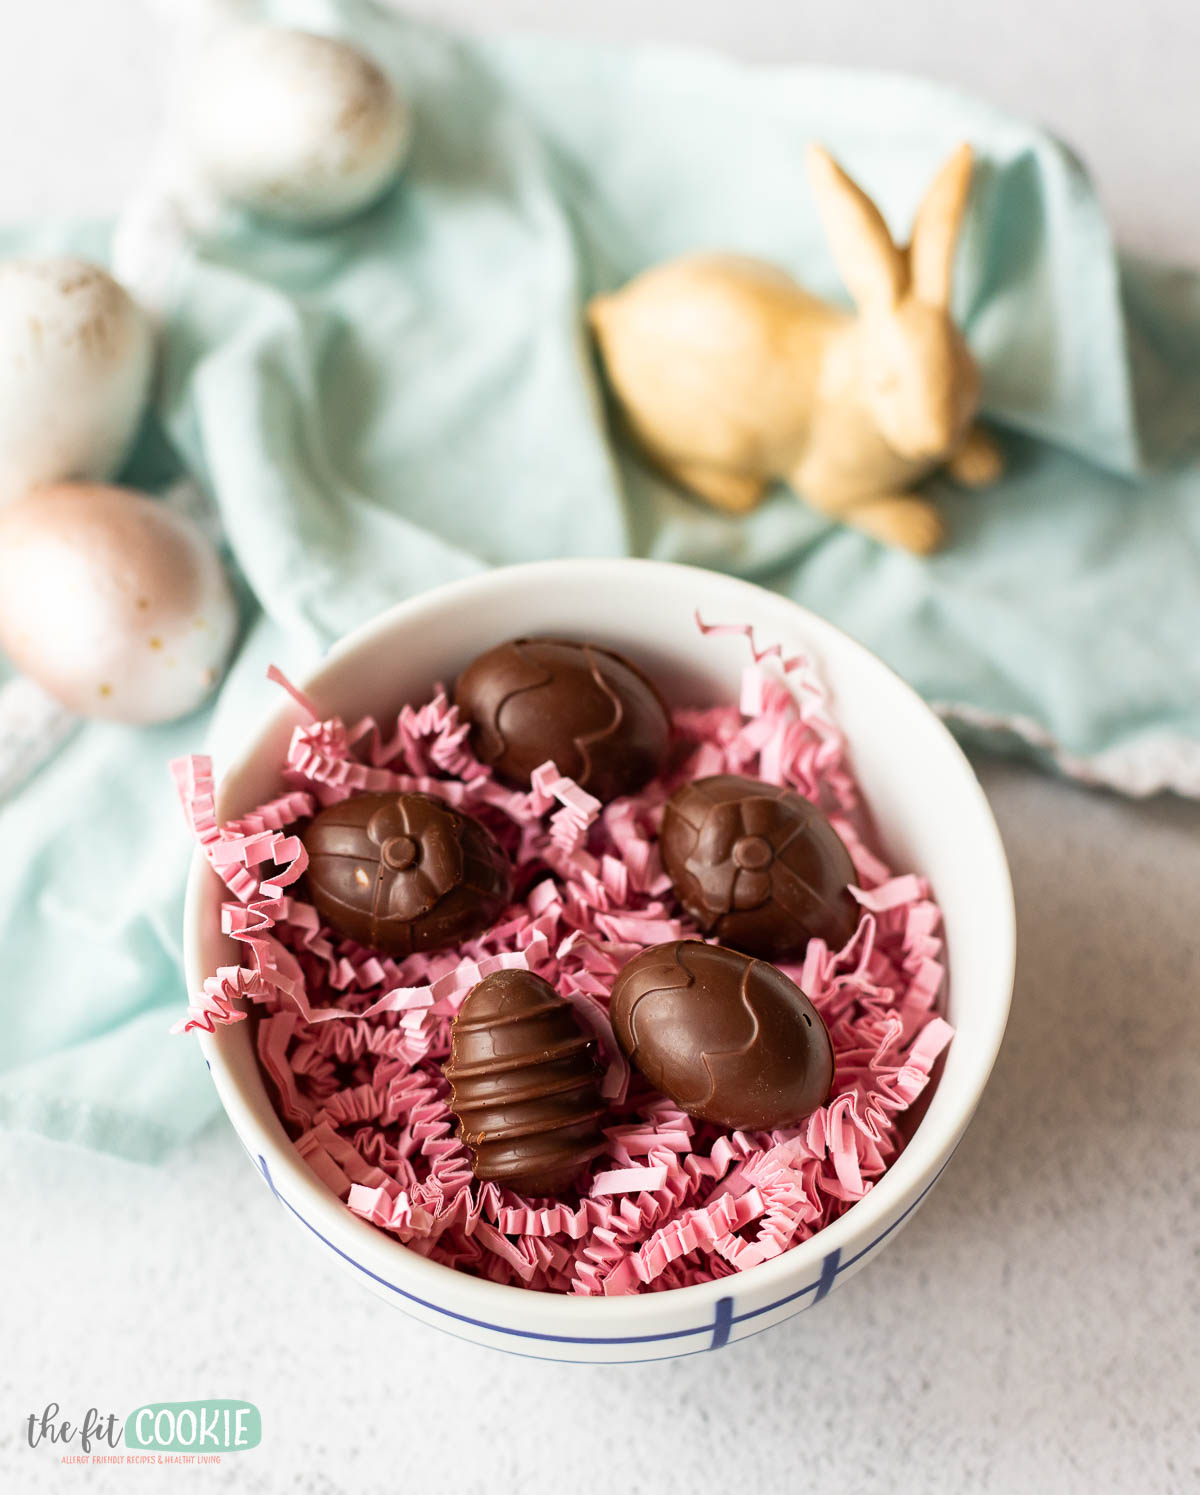 A bowl of chocolate cream eggs on a bed of pink shredded paper with a decorative rabbit and speckled eggs in the background.